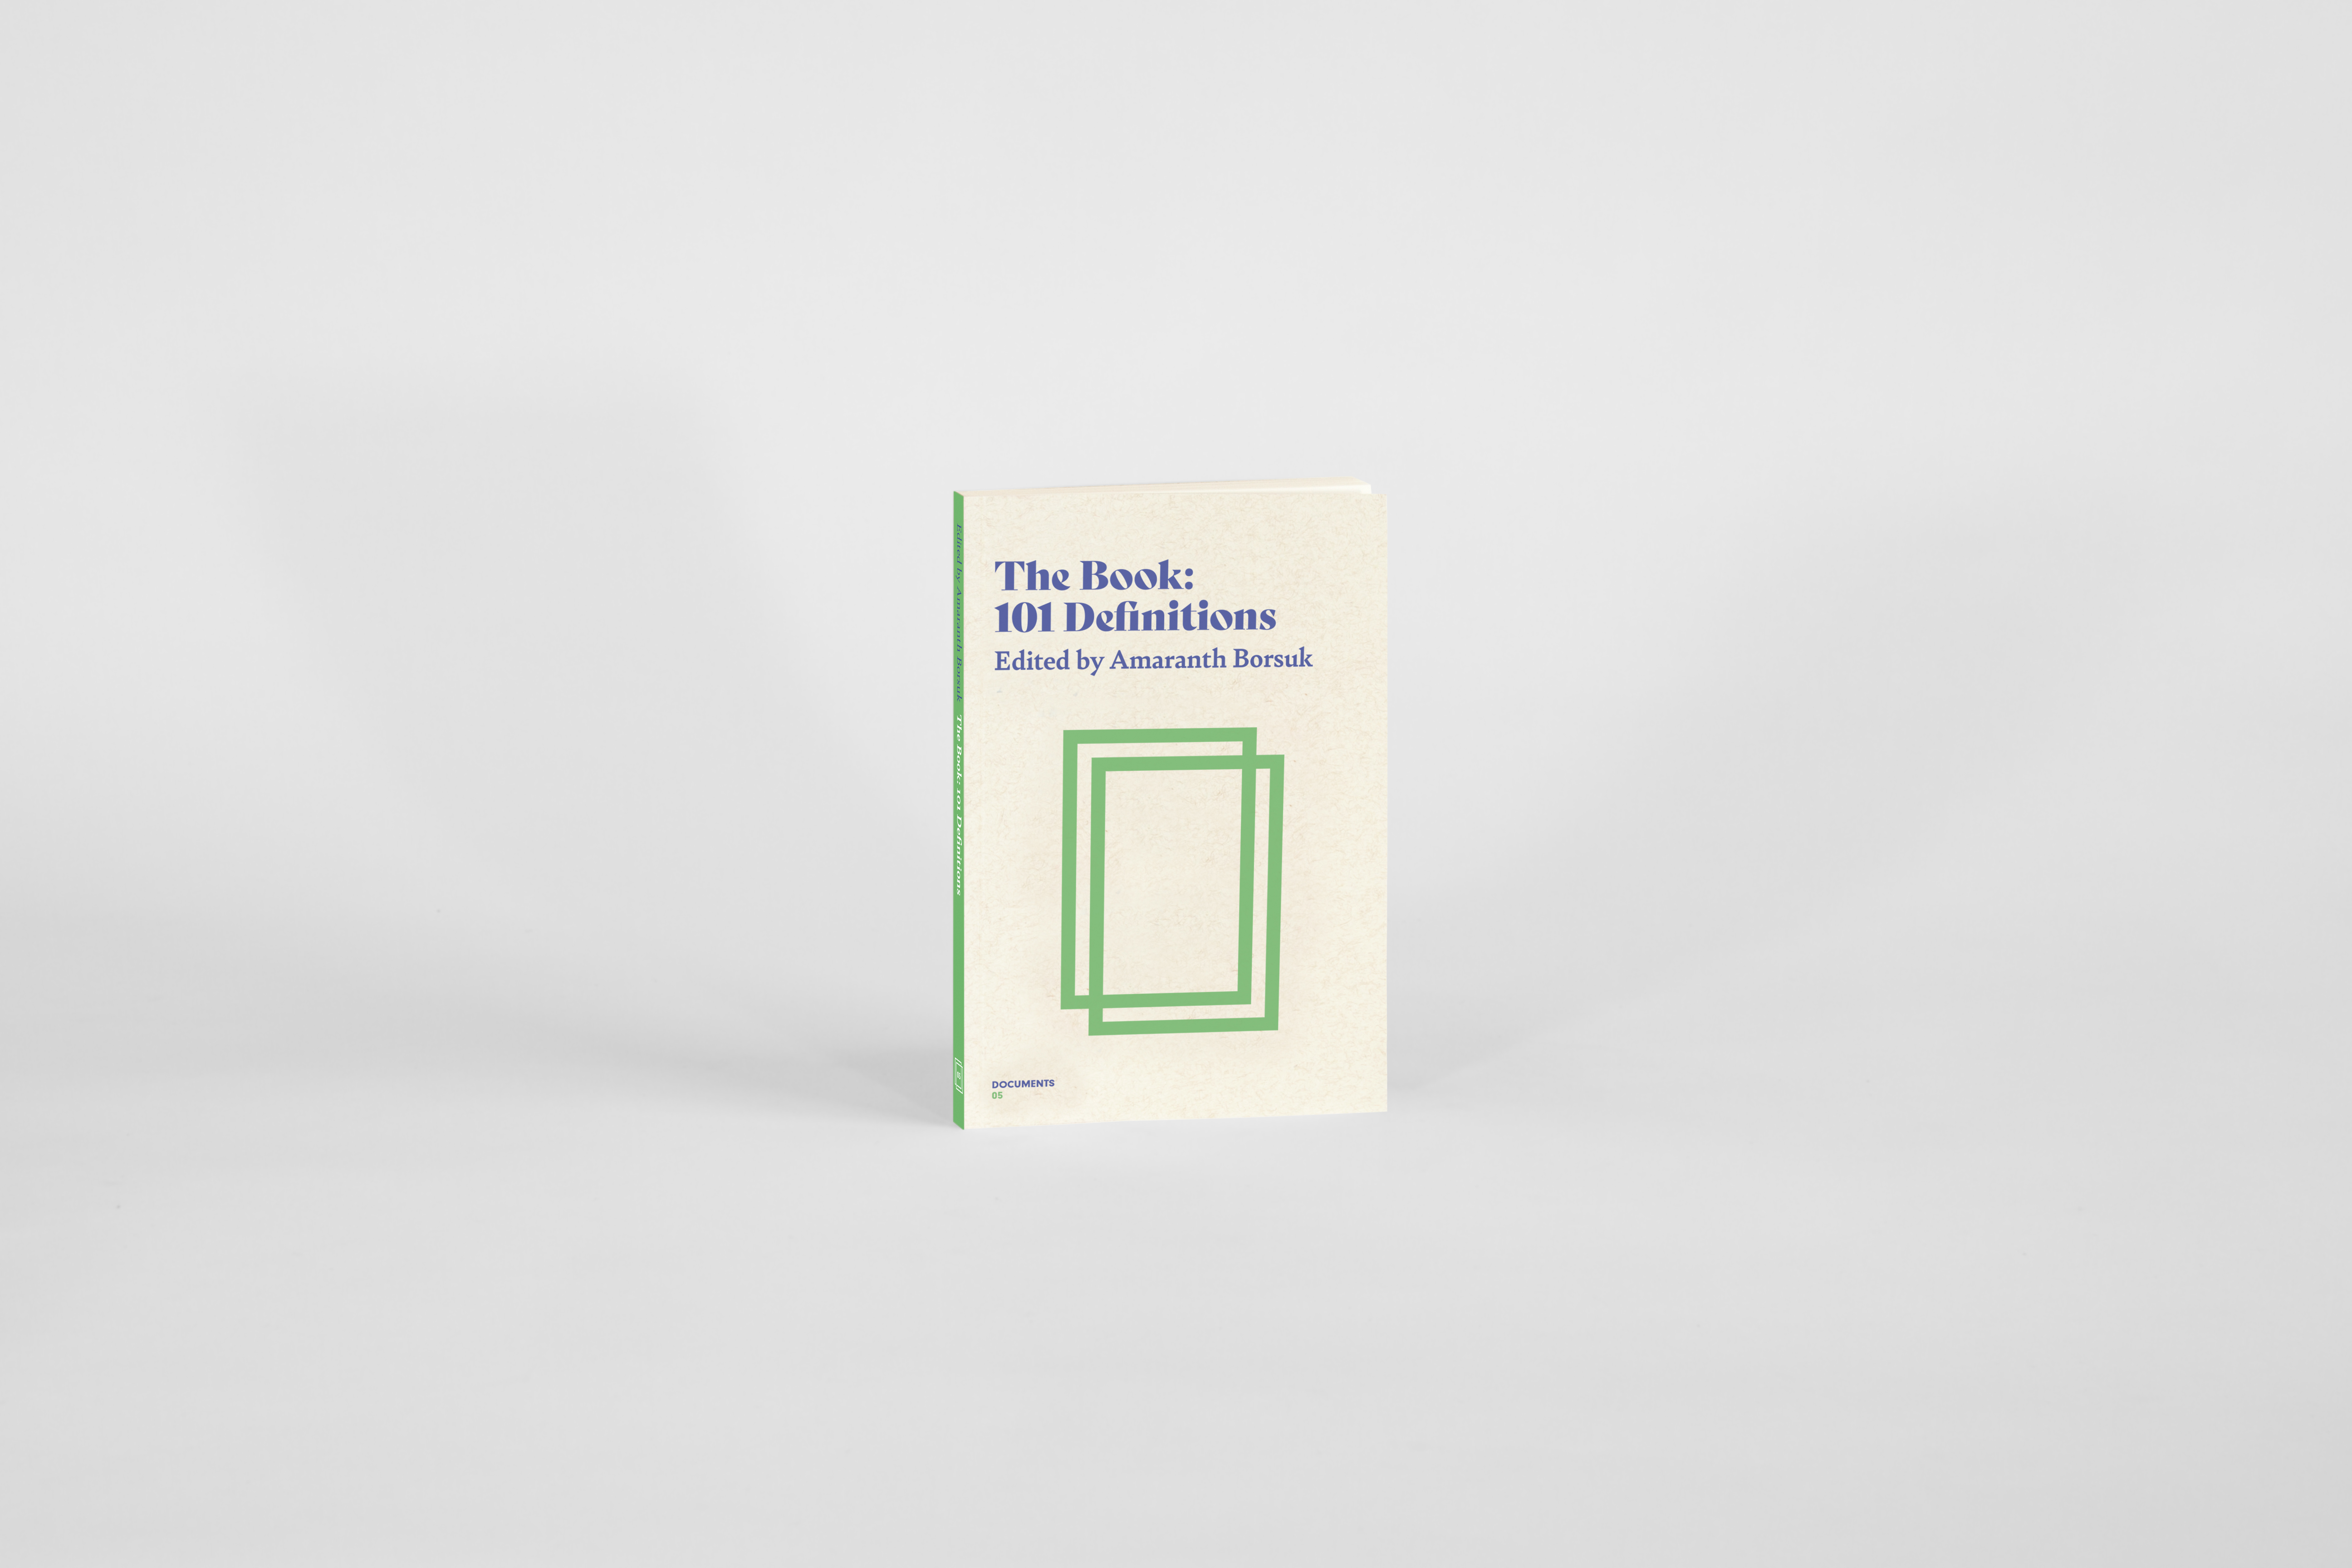 The Book: 101 Definitions, artist's book edited by Amaranth Borsuk